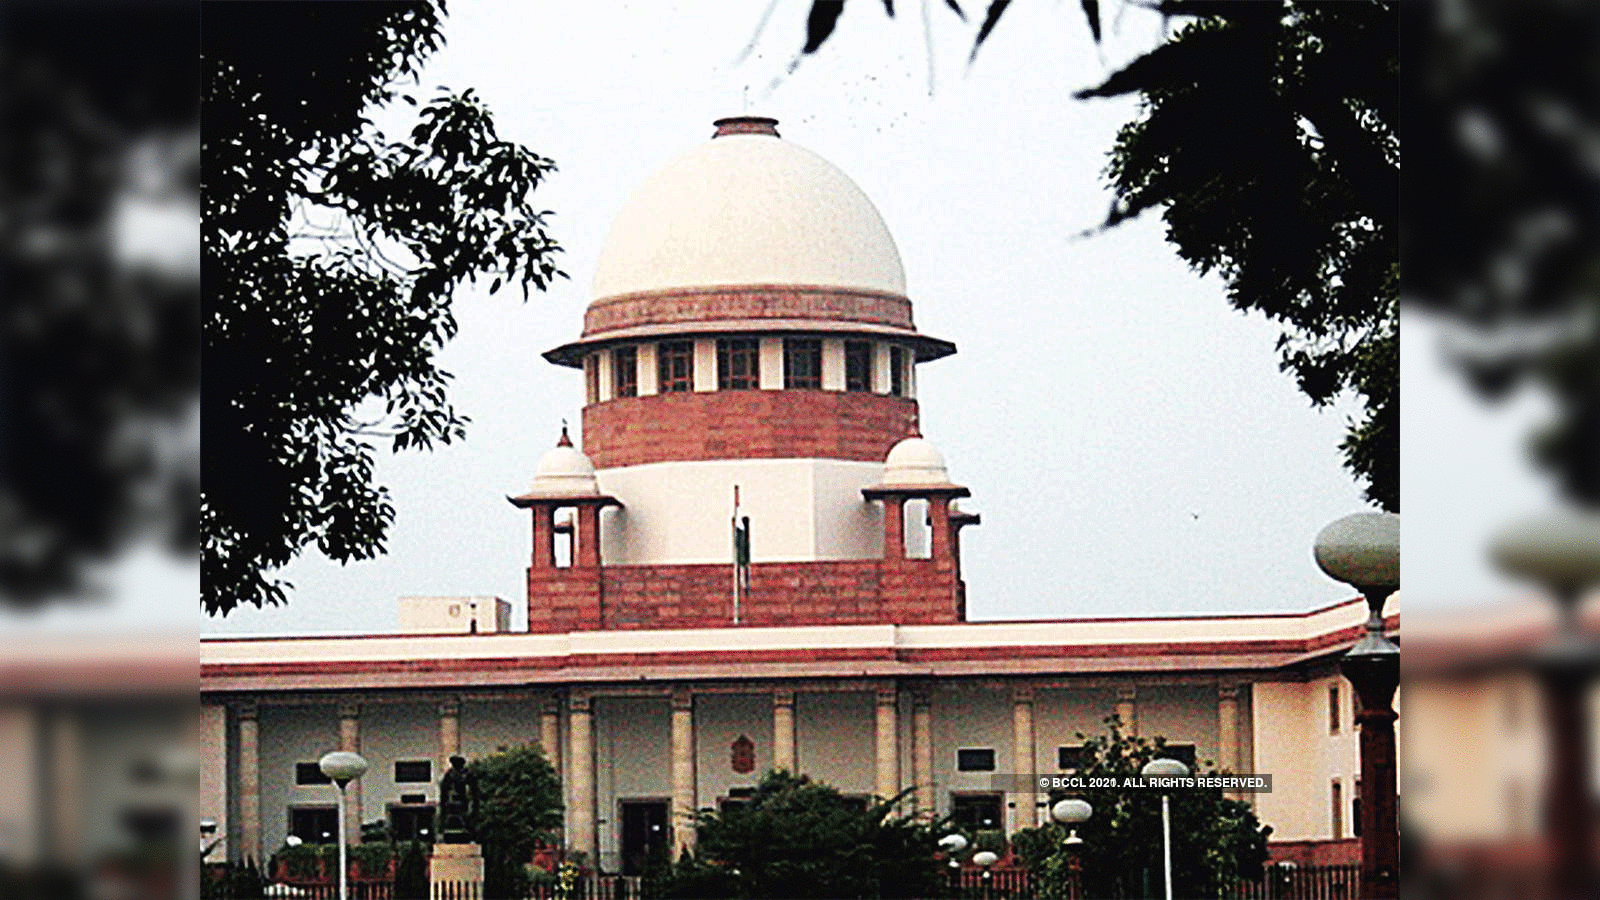 Delhi High Court mandates lawyers to wear gowns from 1 November. Details  here | Mint